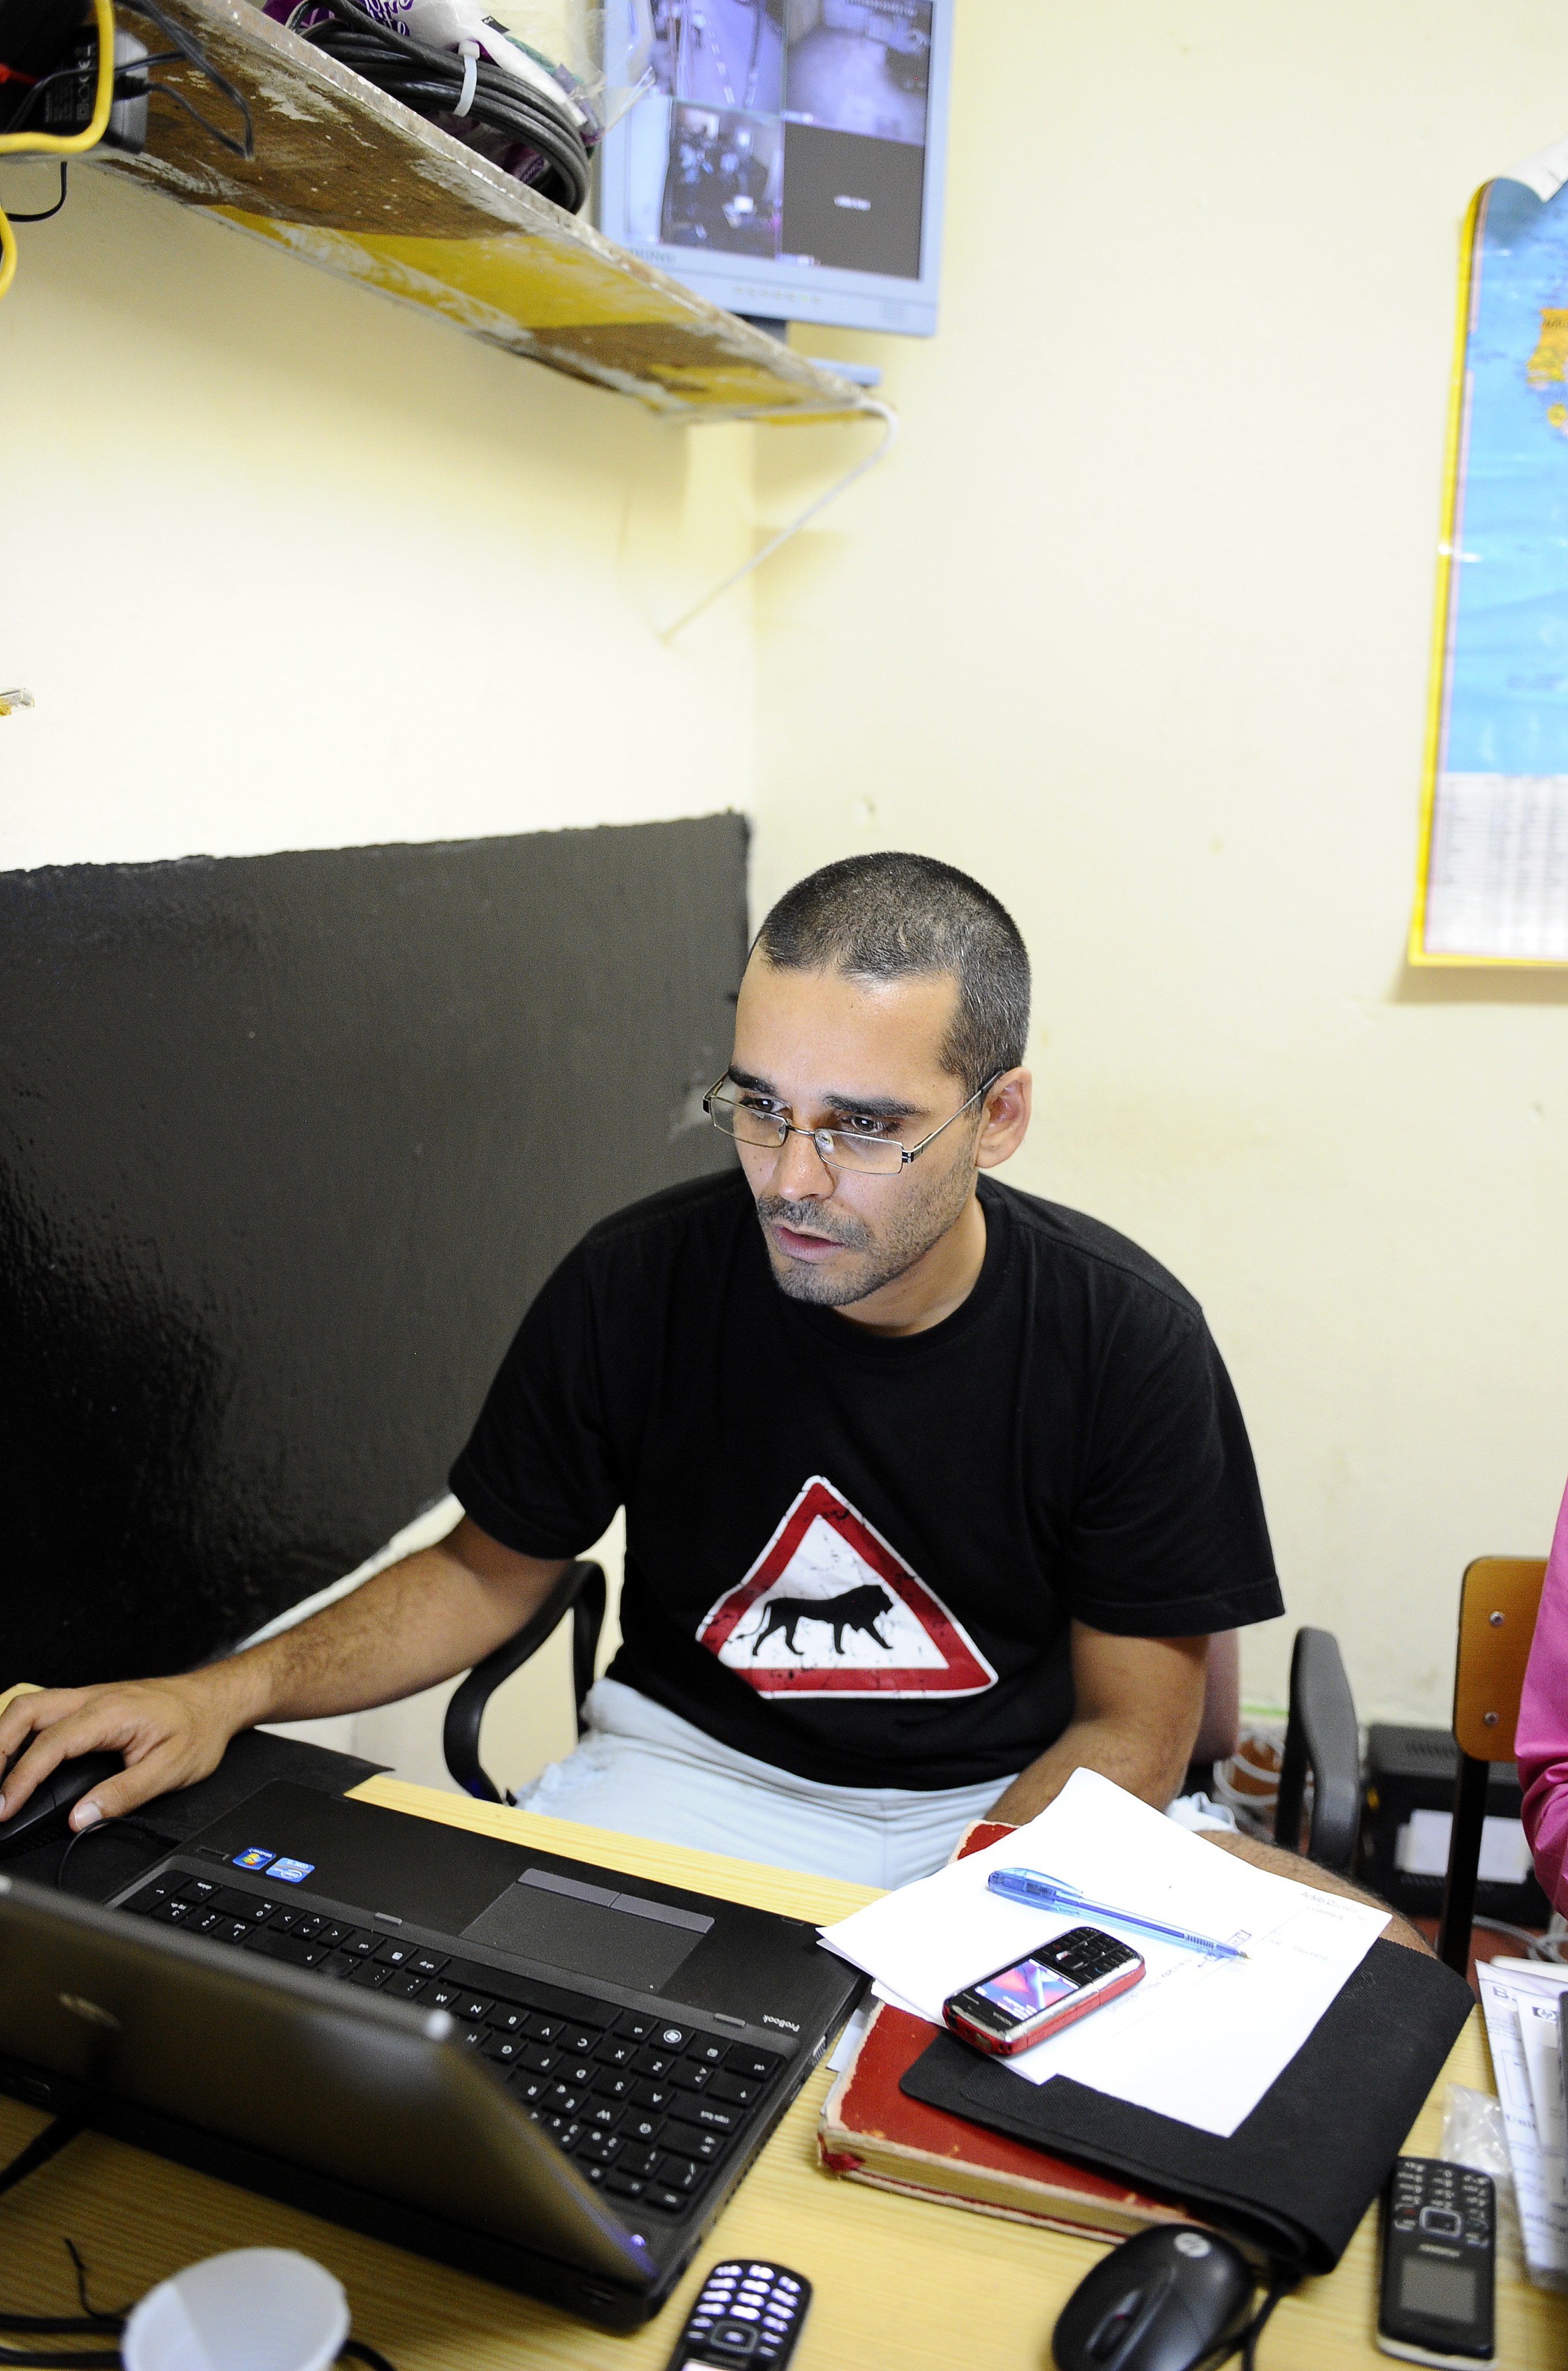 Young Angolan activist Luaty Beirao works on his laptop on August 30, 2012 in Luanda. (STEPHANE DE SAKUTIN—AFP/Getty Images)